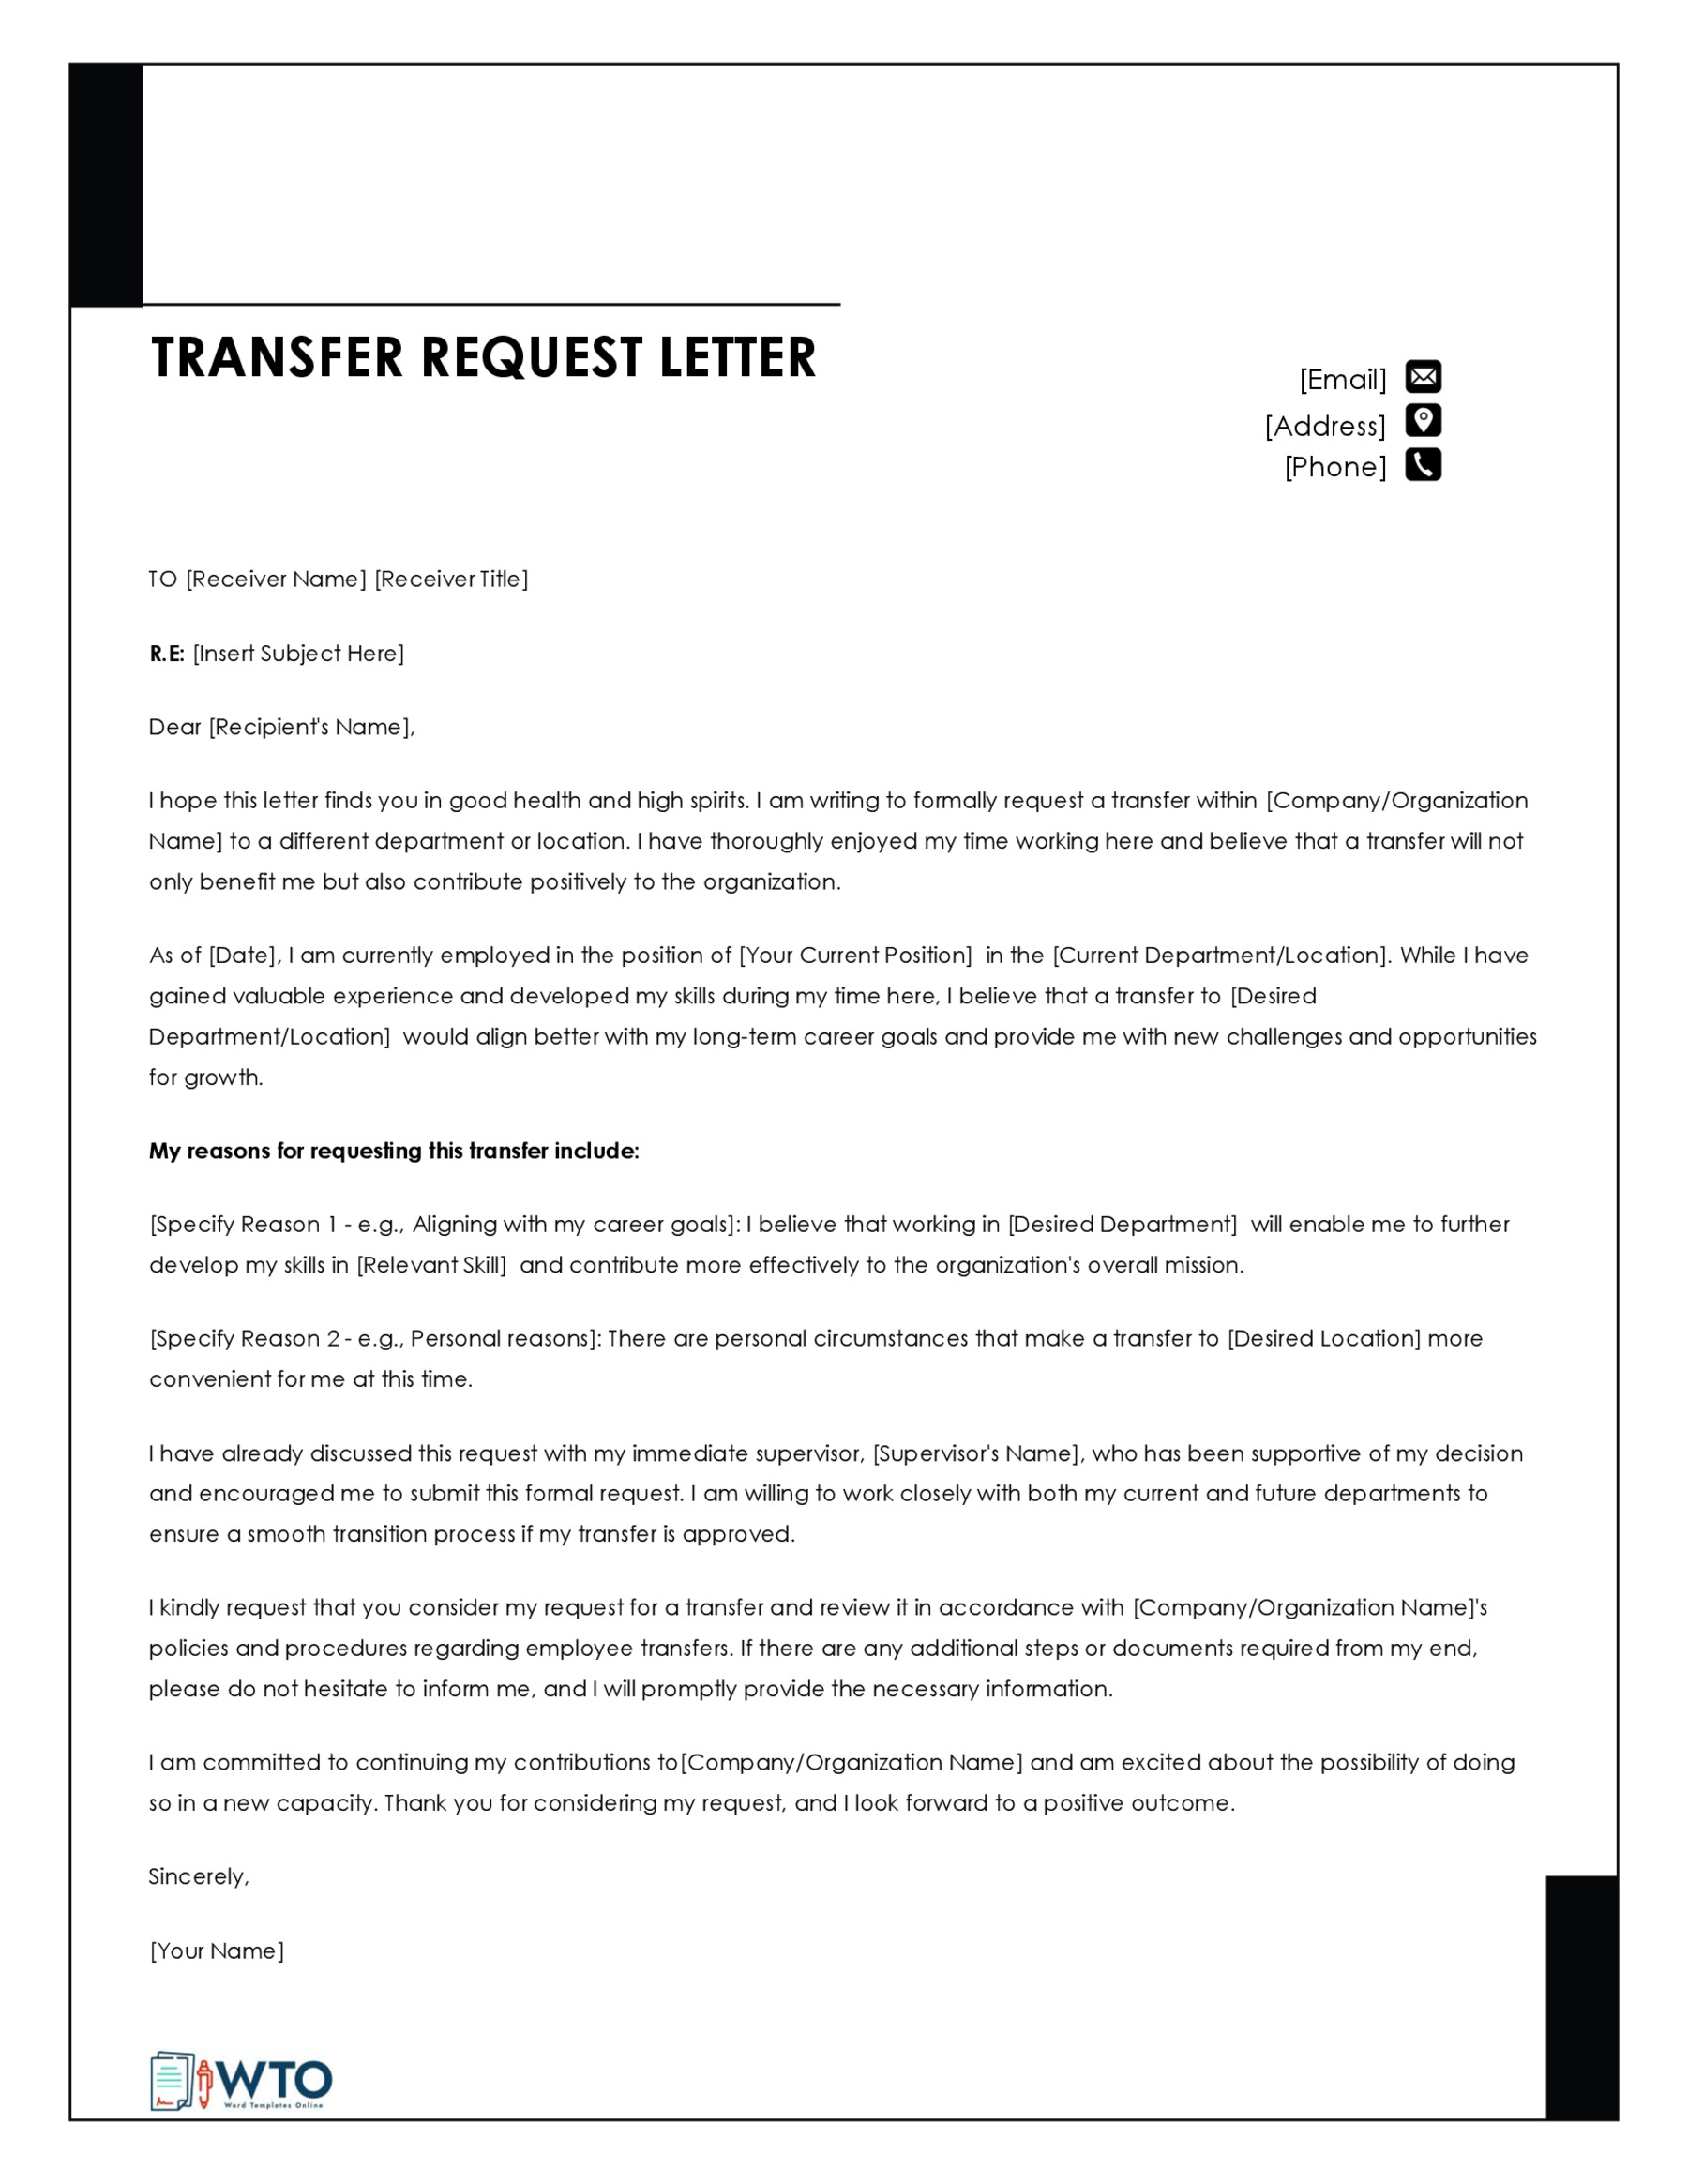 Great Printable Transfer Request Letter Sample 08 in Word Format